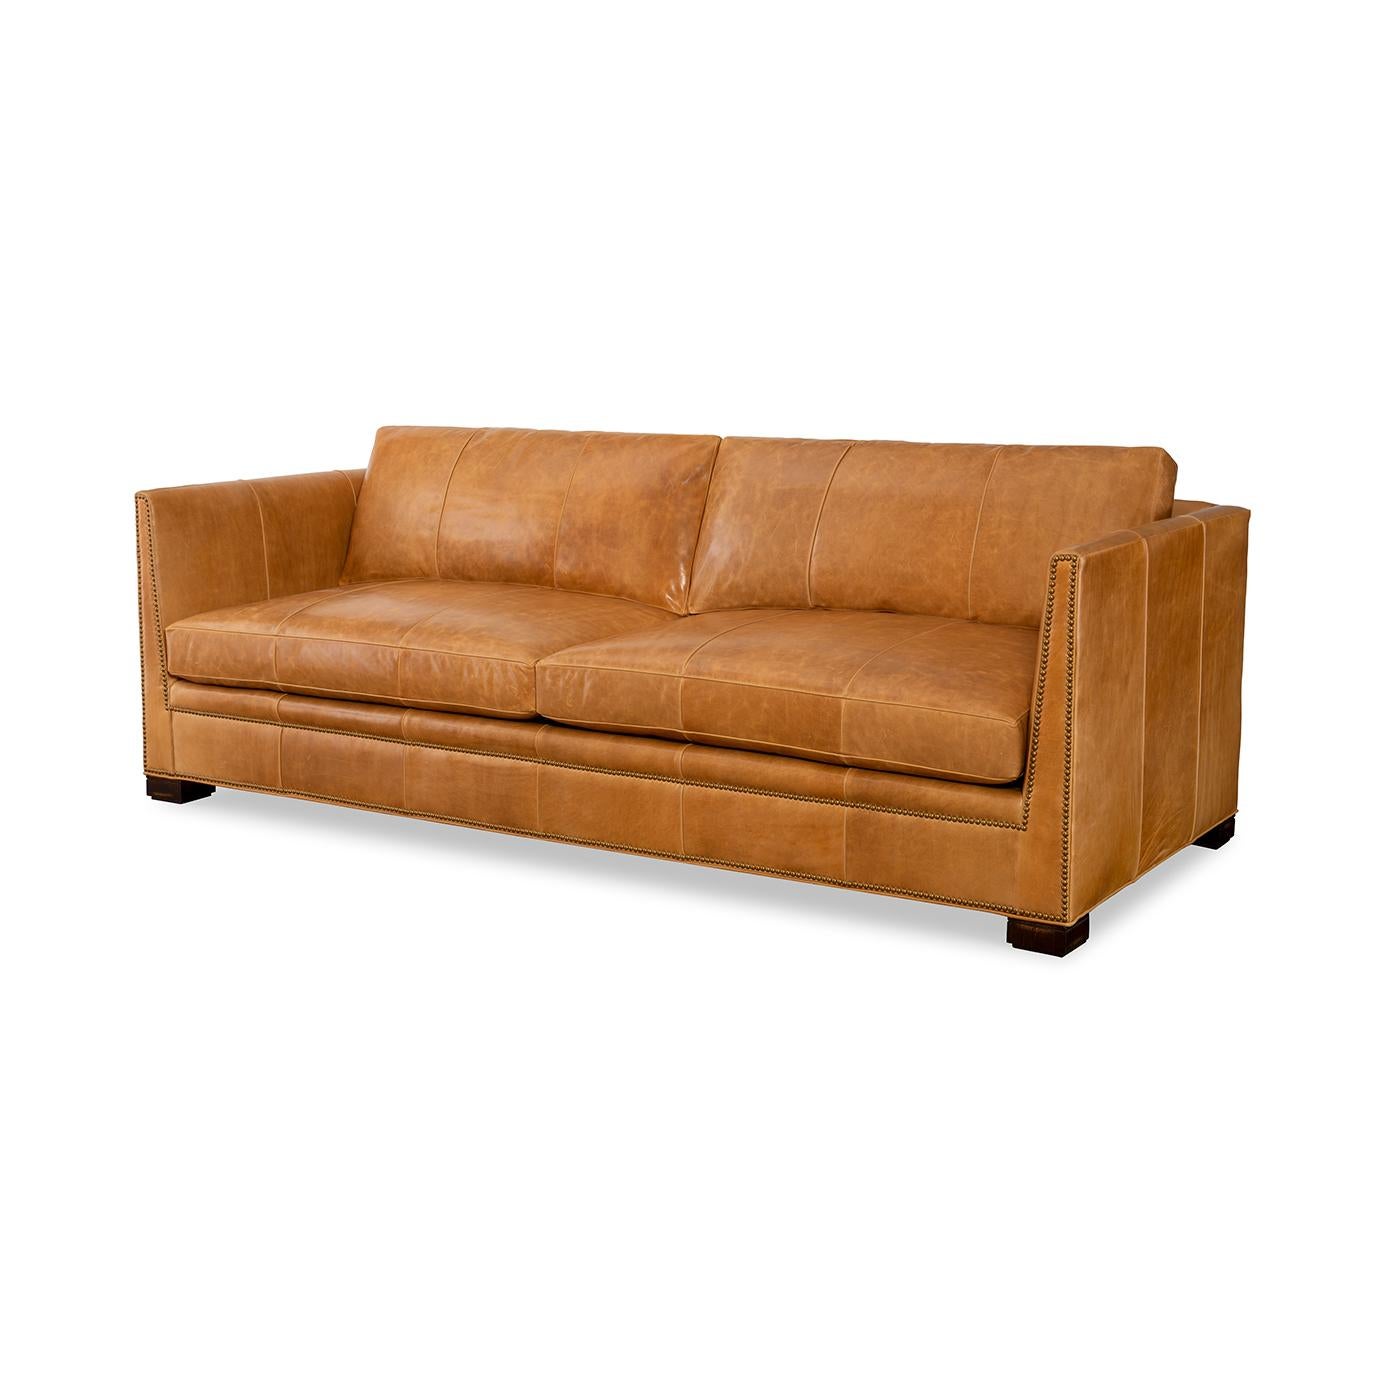 Contemporary Modern Leather Thorpe Sofa For Sale